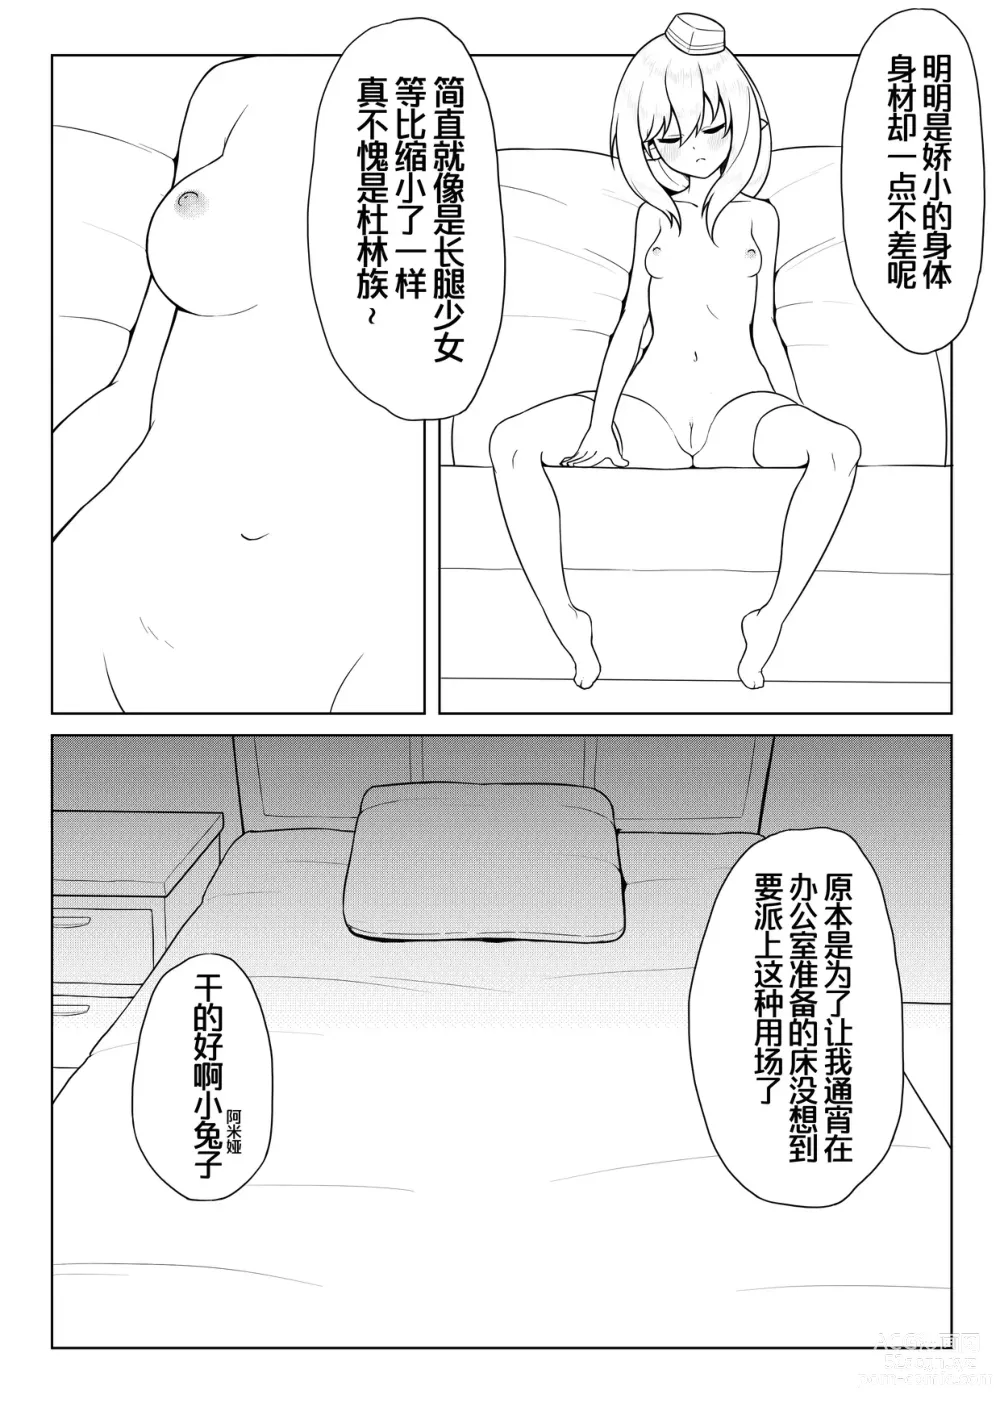 Page 7 of doujinshi Durins Self-hypnosis (decensored)